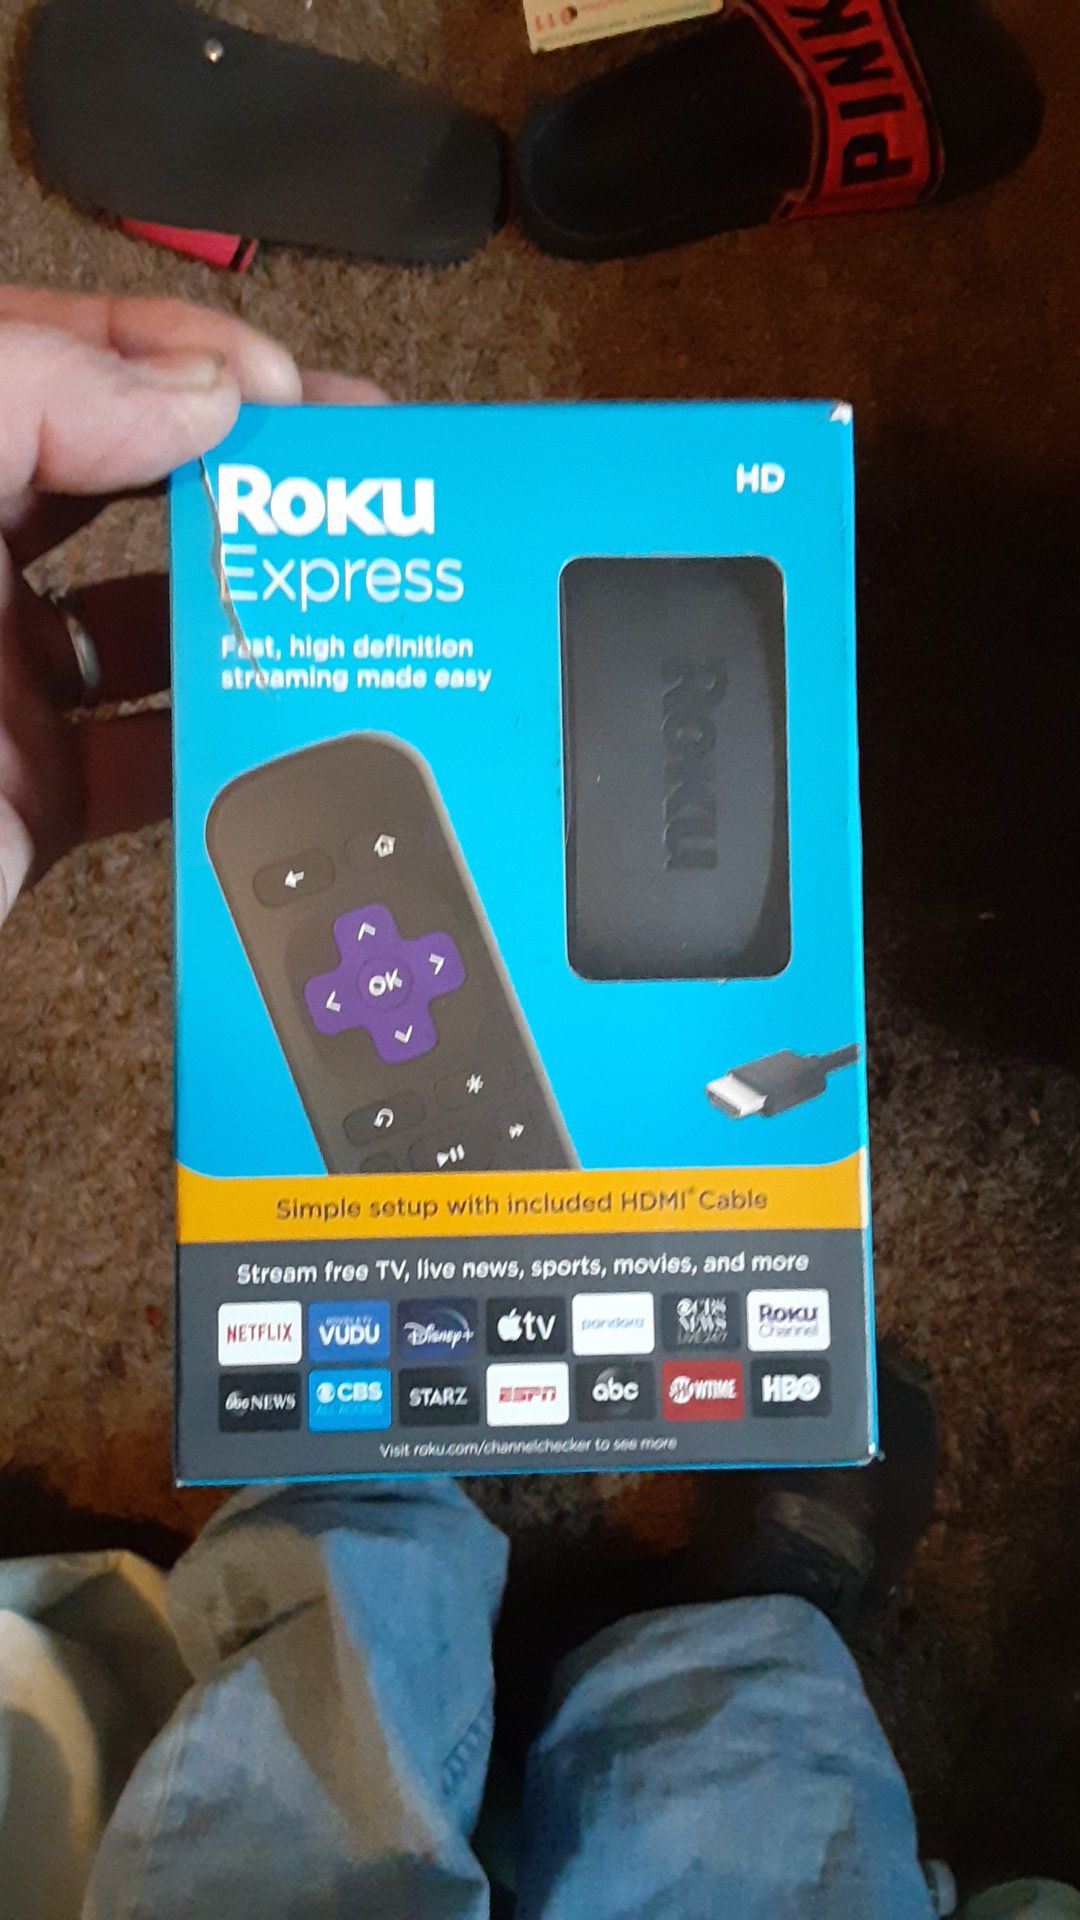 Roku Express brand new been used once just hooked up but I can delete everything on there it has the HDMI cable included